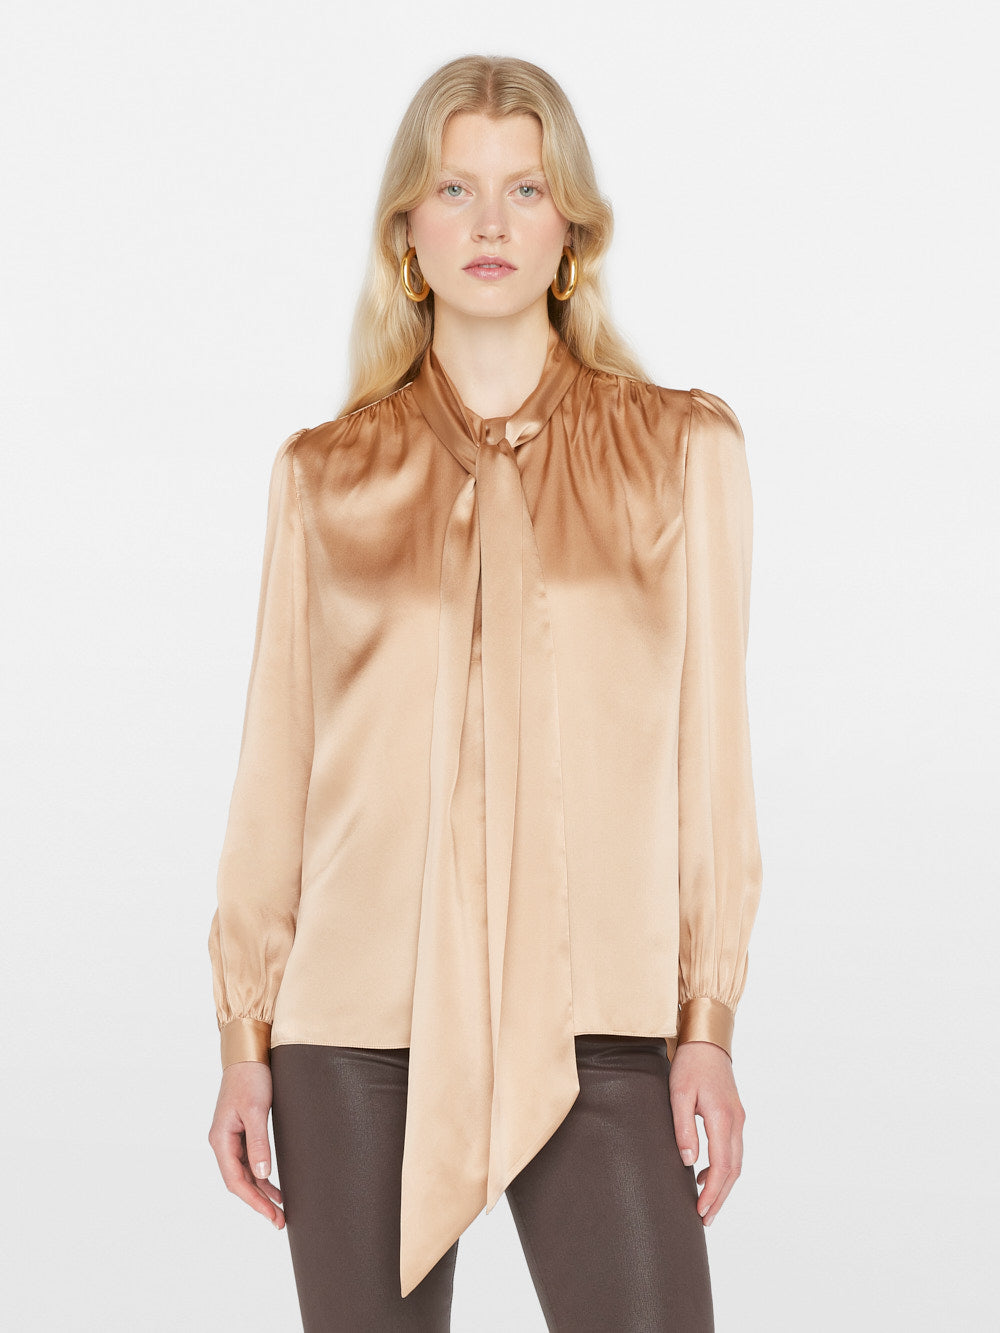 Femme Tie Neck Blouse by Frame